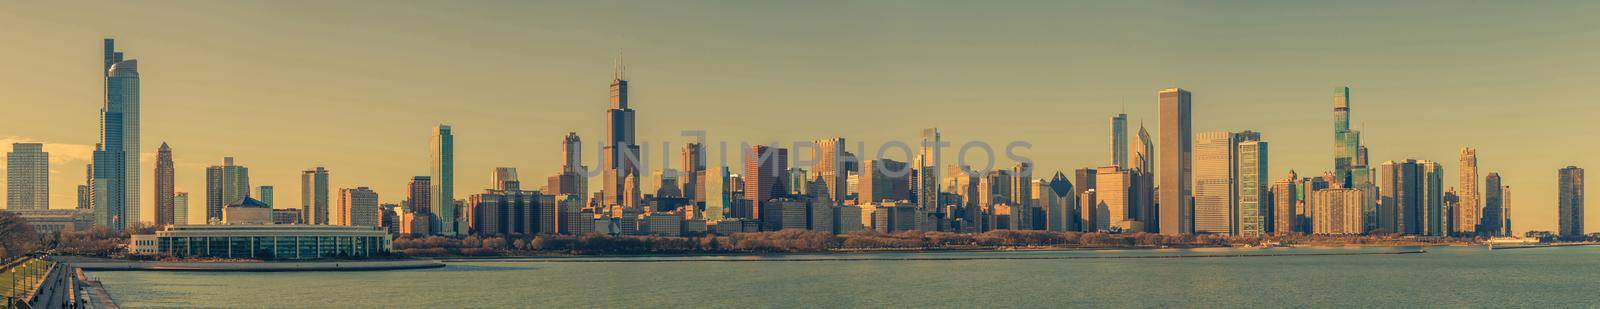 Panoramic Skyline of Chicago Downtown Illinois by welcomia